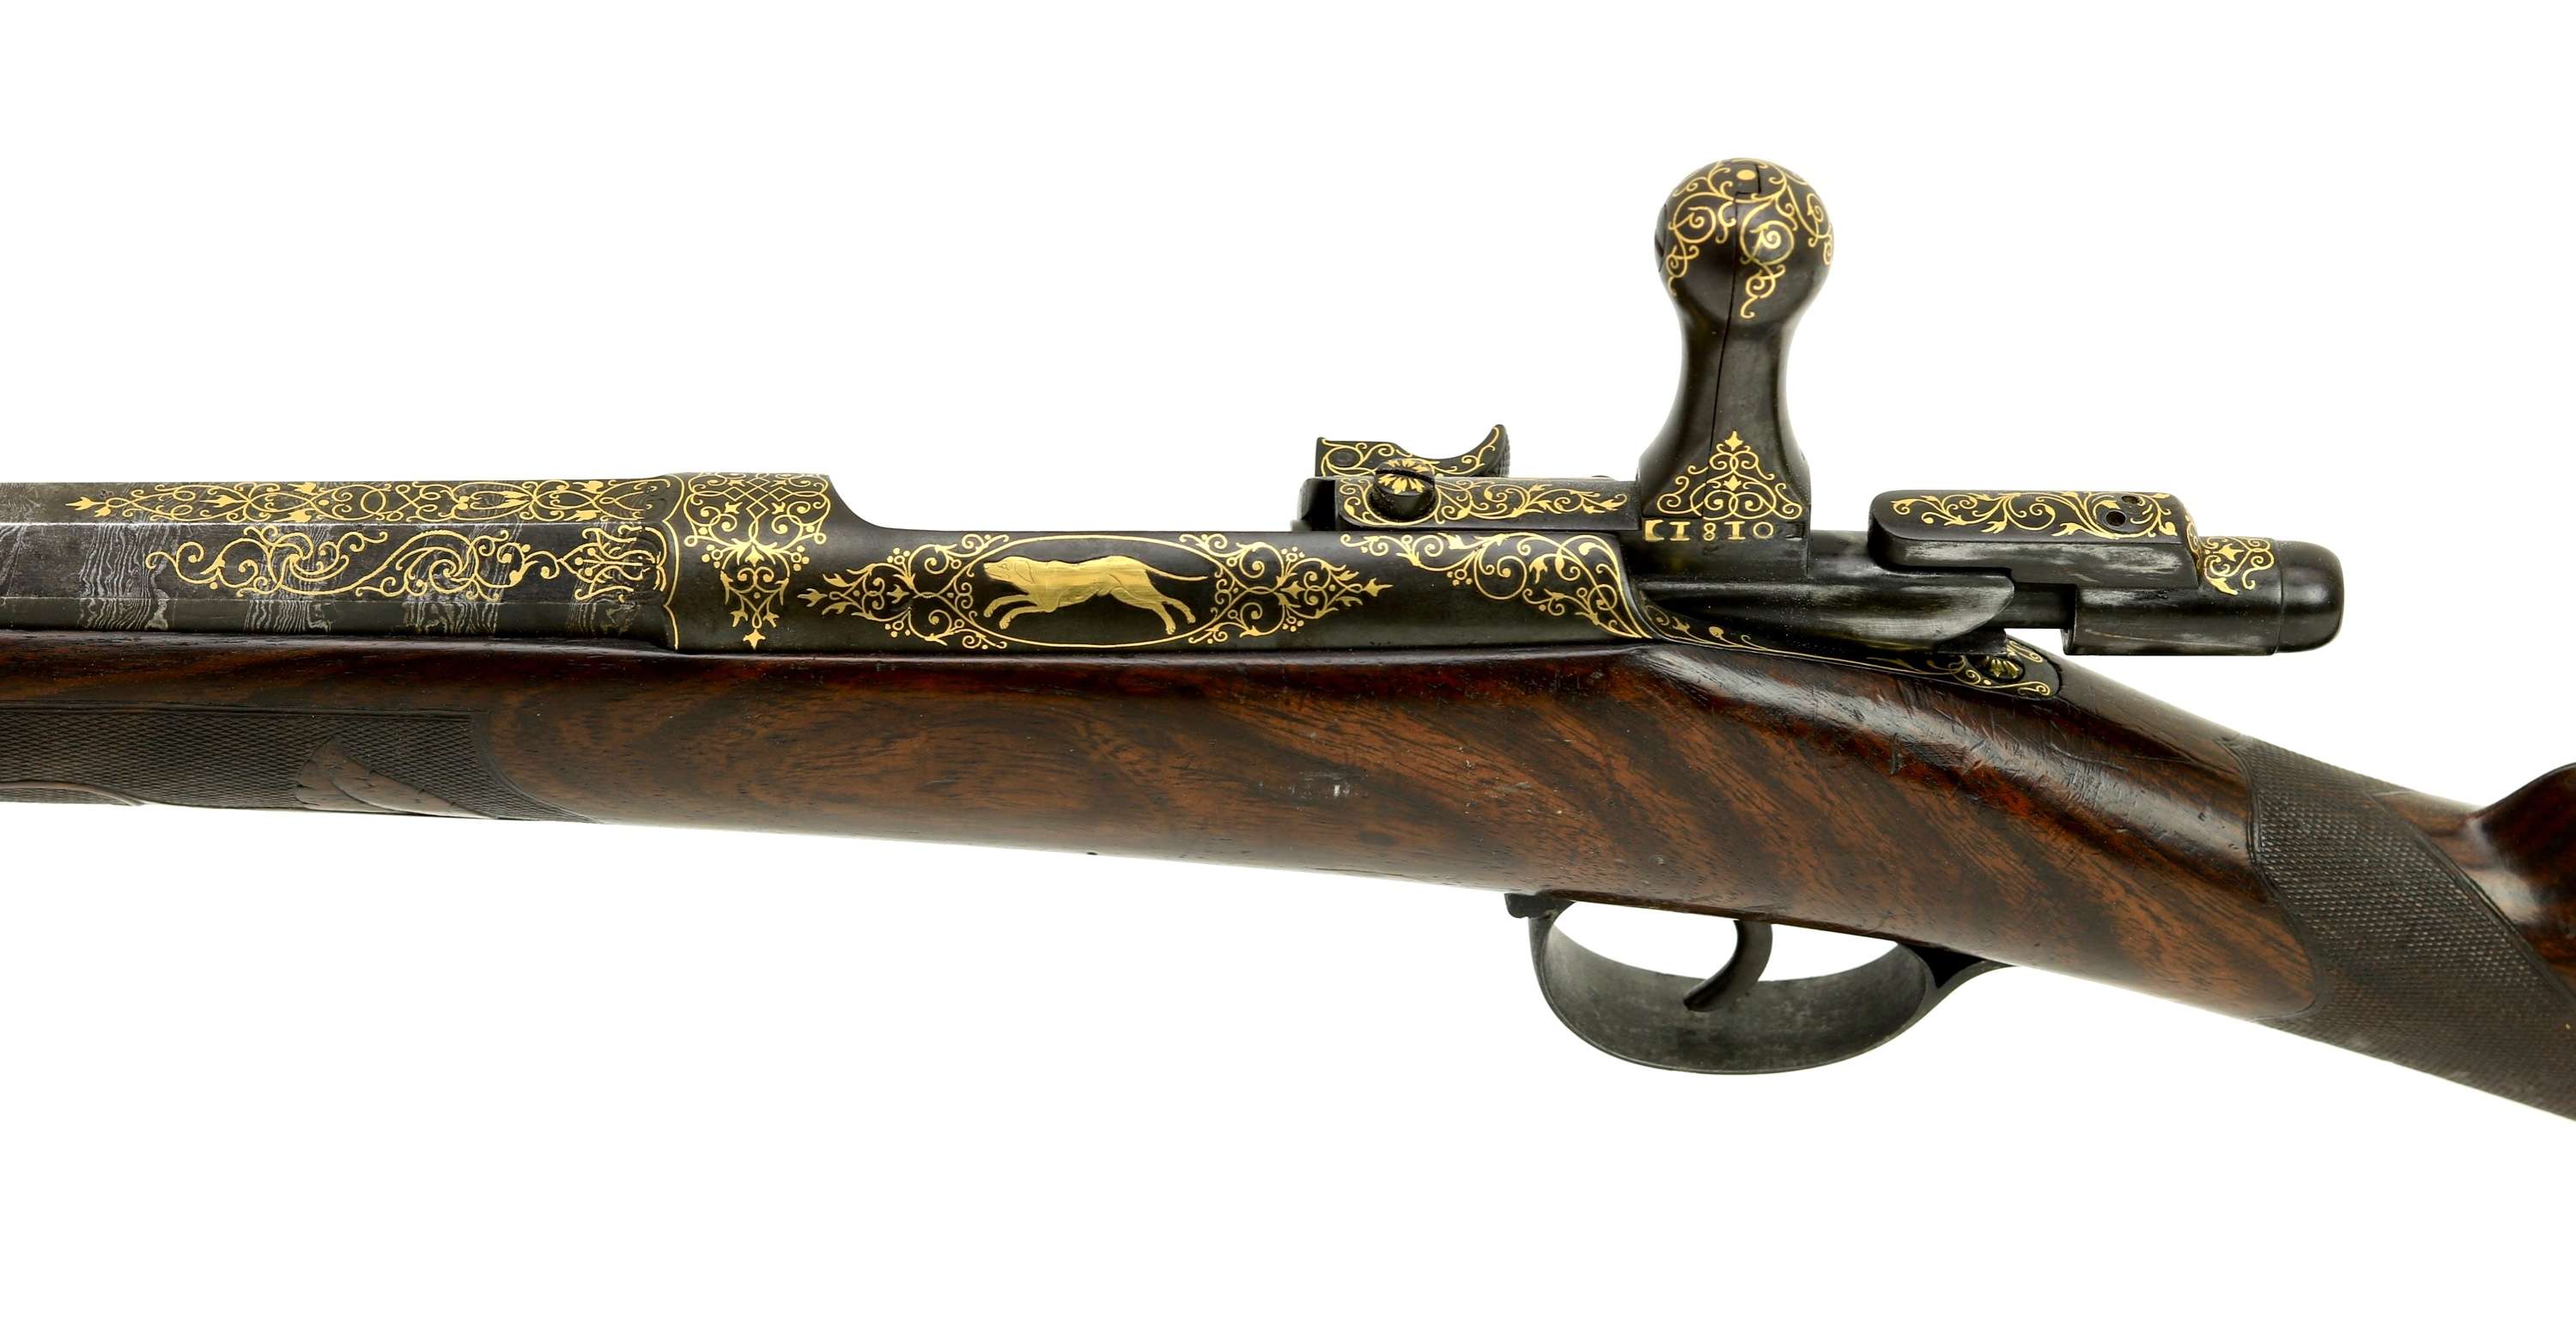 Dutch colonial sporting gun, made in Indonesia and based on Beaumont technology